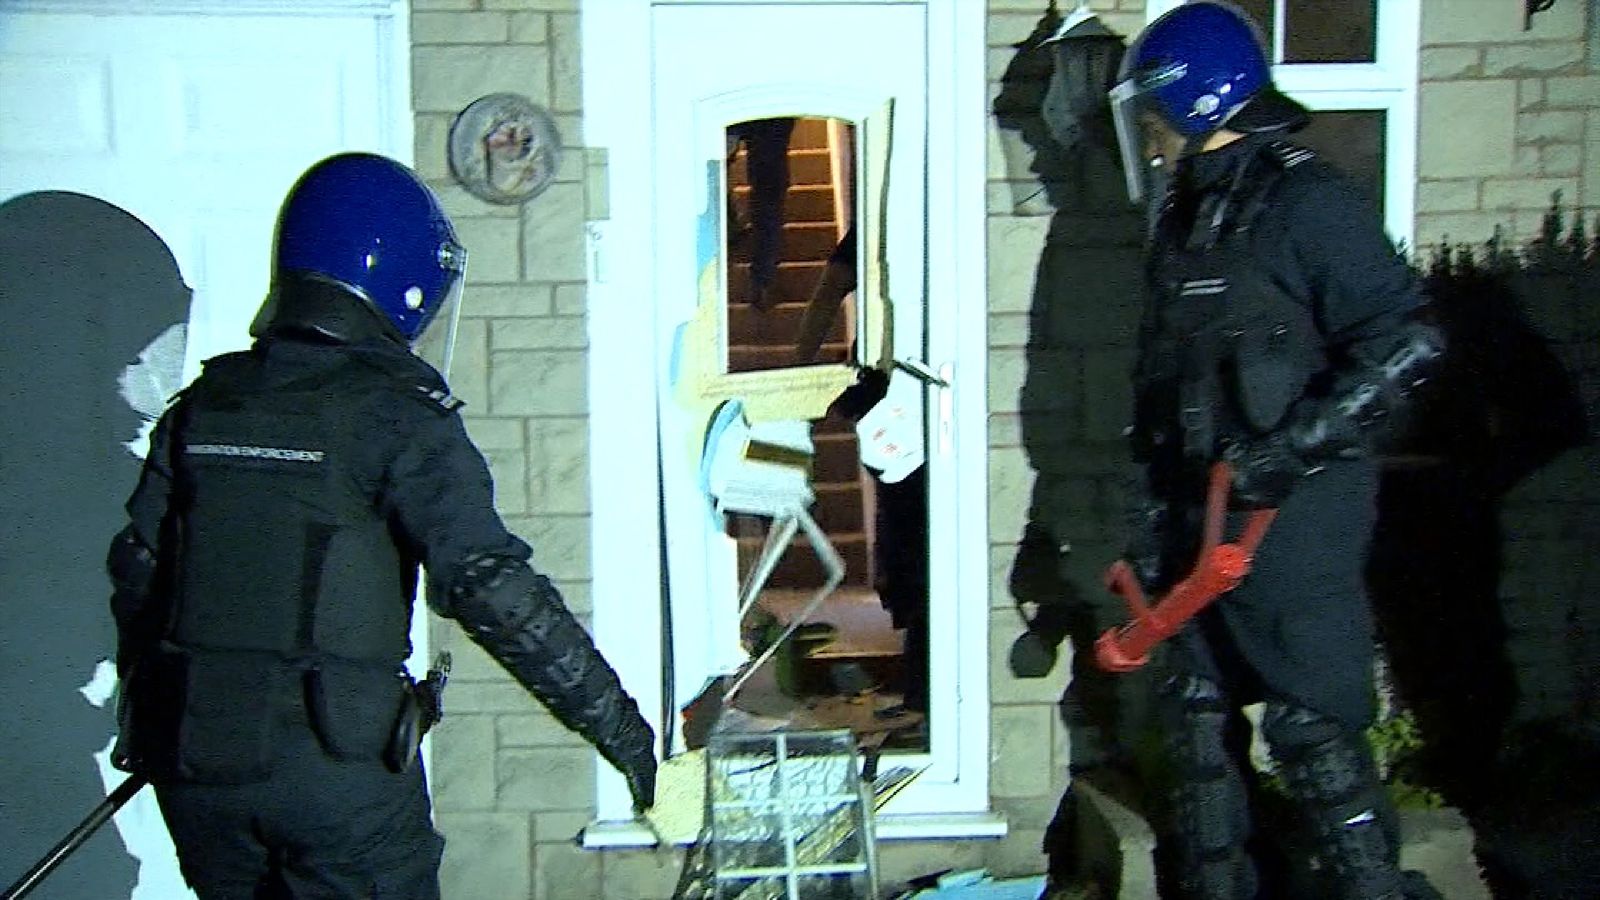 Dozens Arrested In Uk And Europe Raids Amid Human Trafficking Crackdown Uk News Sky News 4357